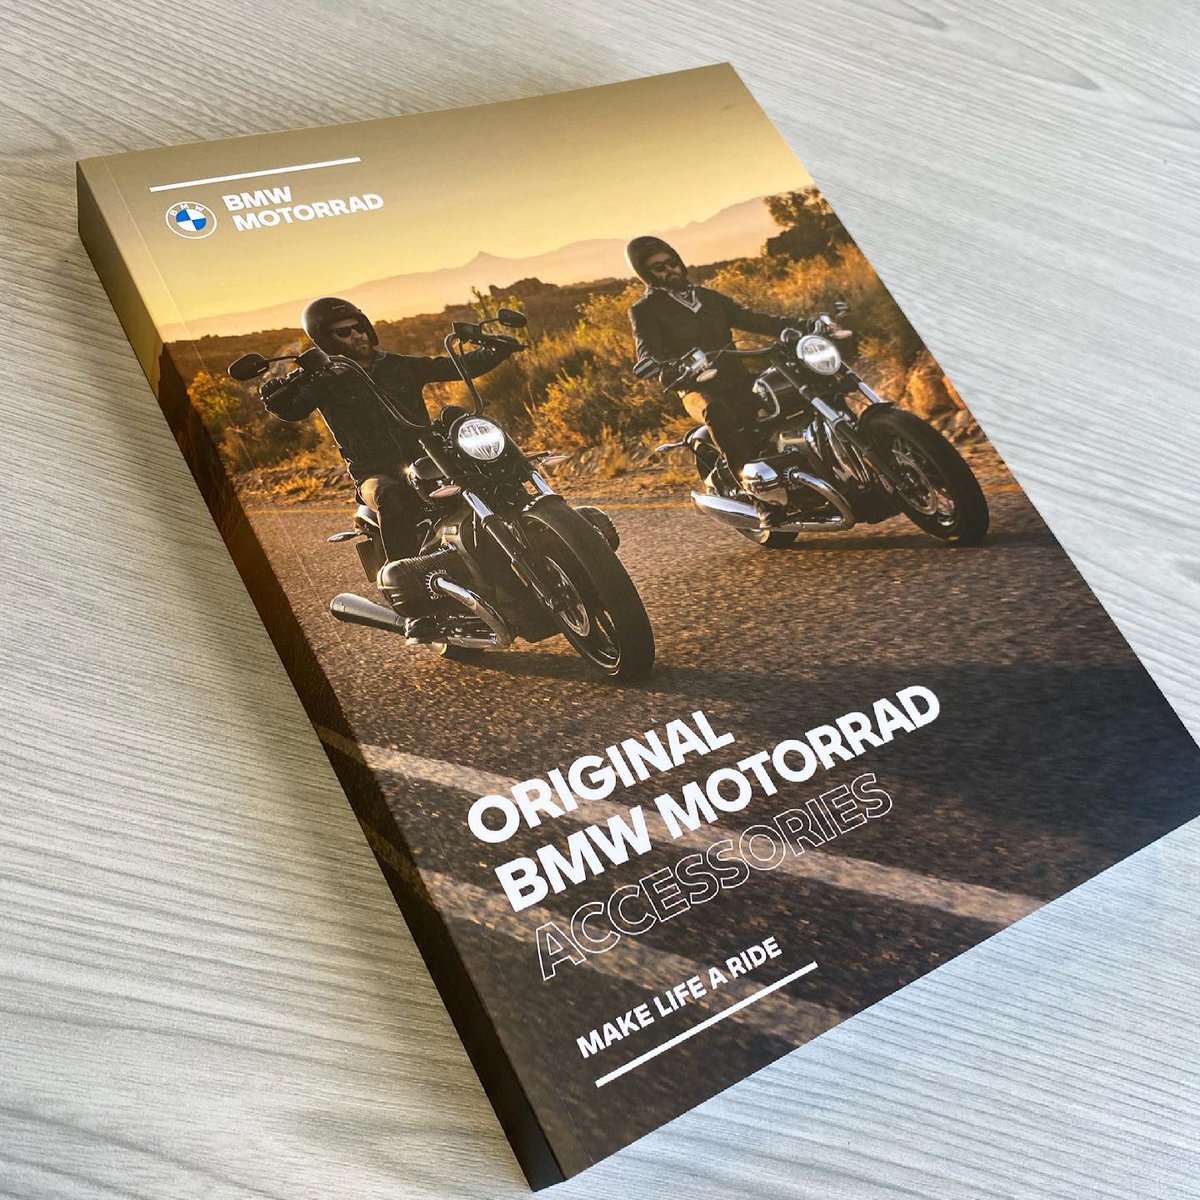 Kompatibel med fantastisk Og hold Ocean BMW Bikes on Twitter: "The 2021 BMW Motorrad Accessories brochure is  available at Ocean! Jam packed with 340 pages of original BMW accessories,  all available with click and collect. Speak to